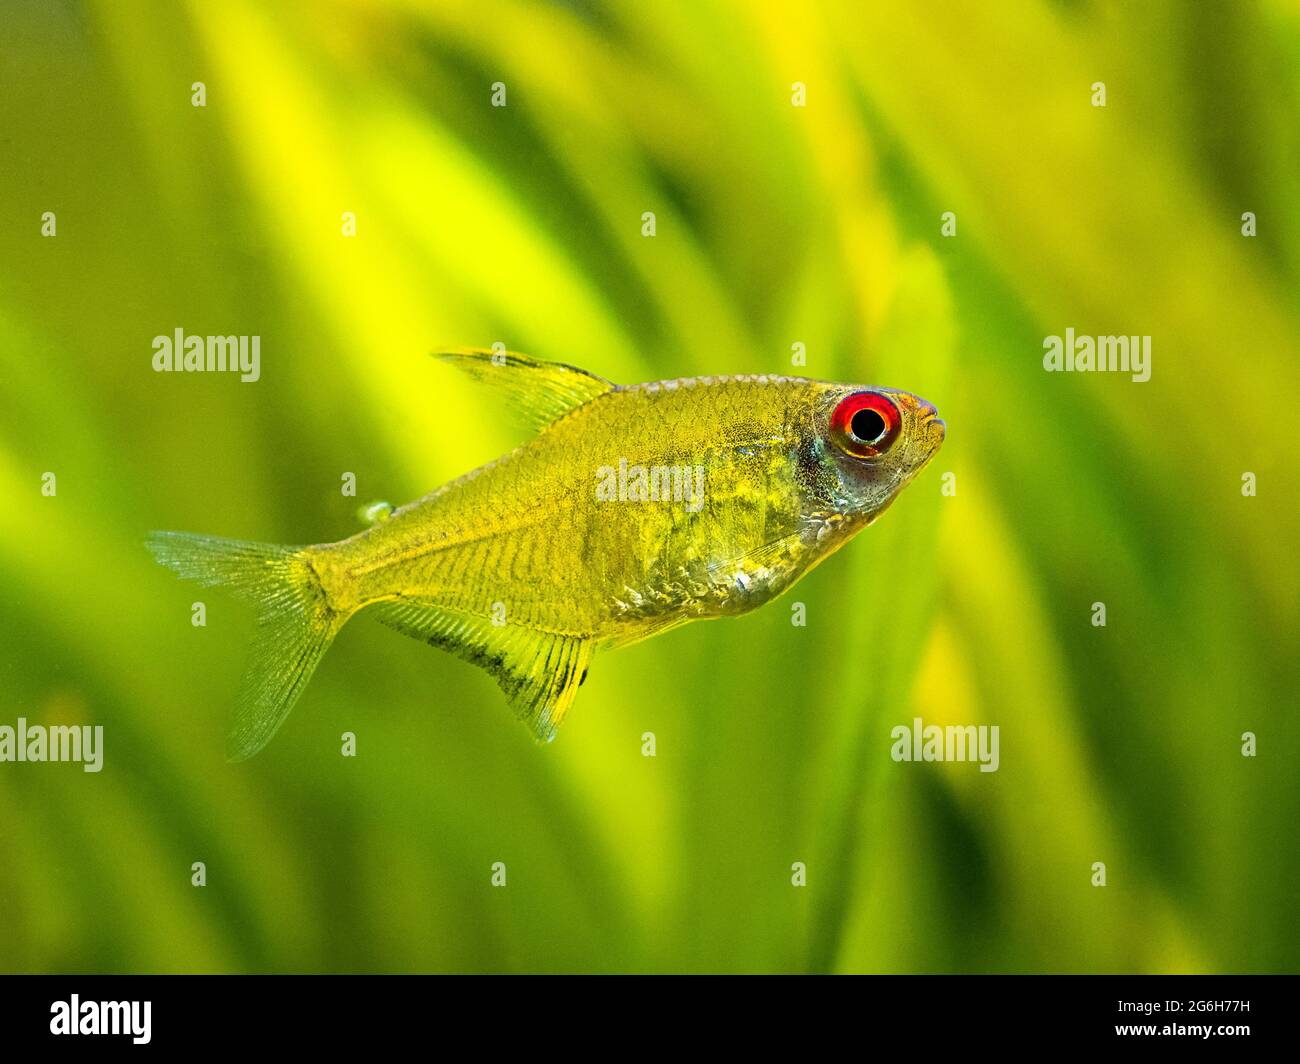 macro close up of a lemon tetra (Hyphessobrycon pulchripinnis ) in a fish tank with blurred background Stock Photo